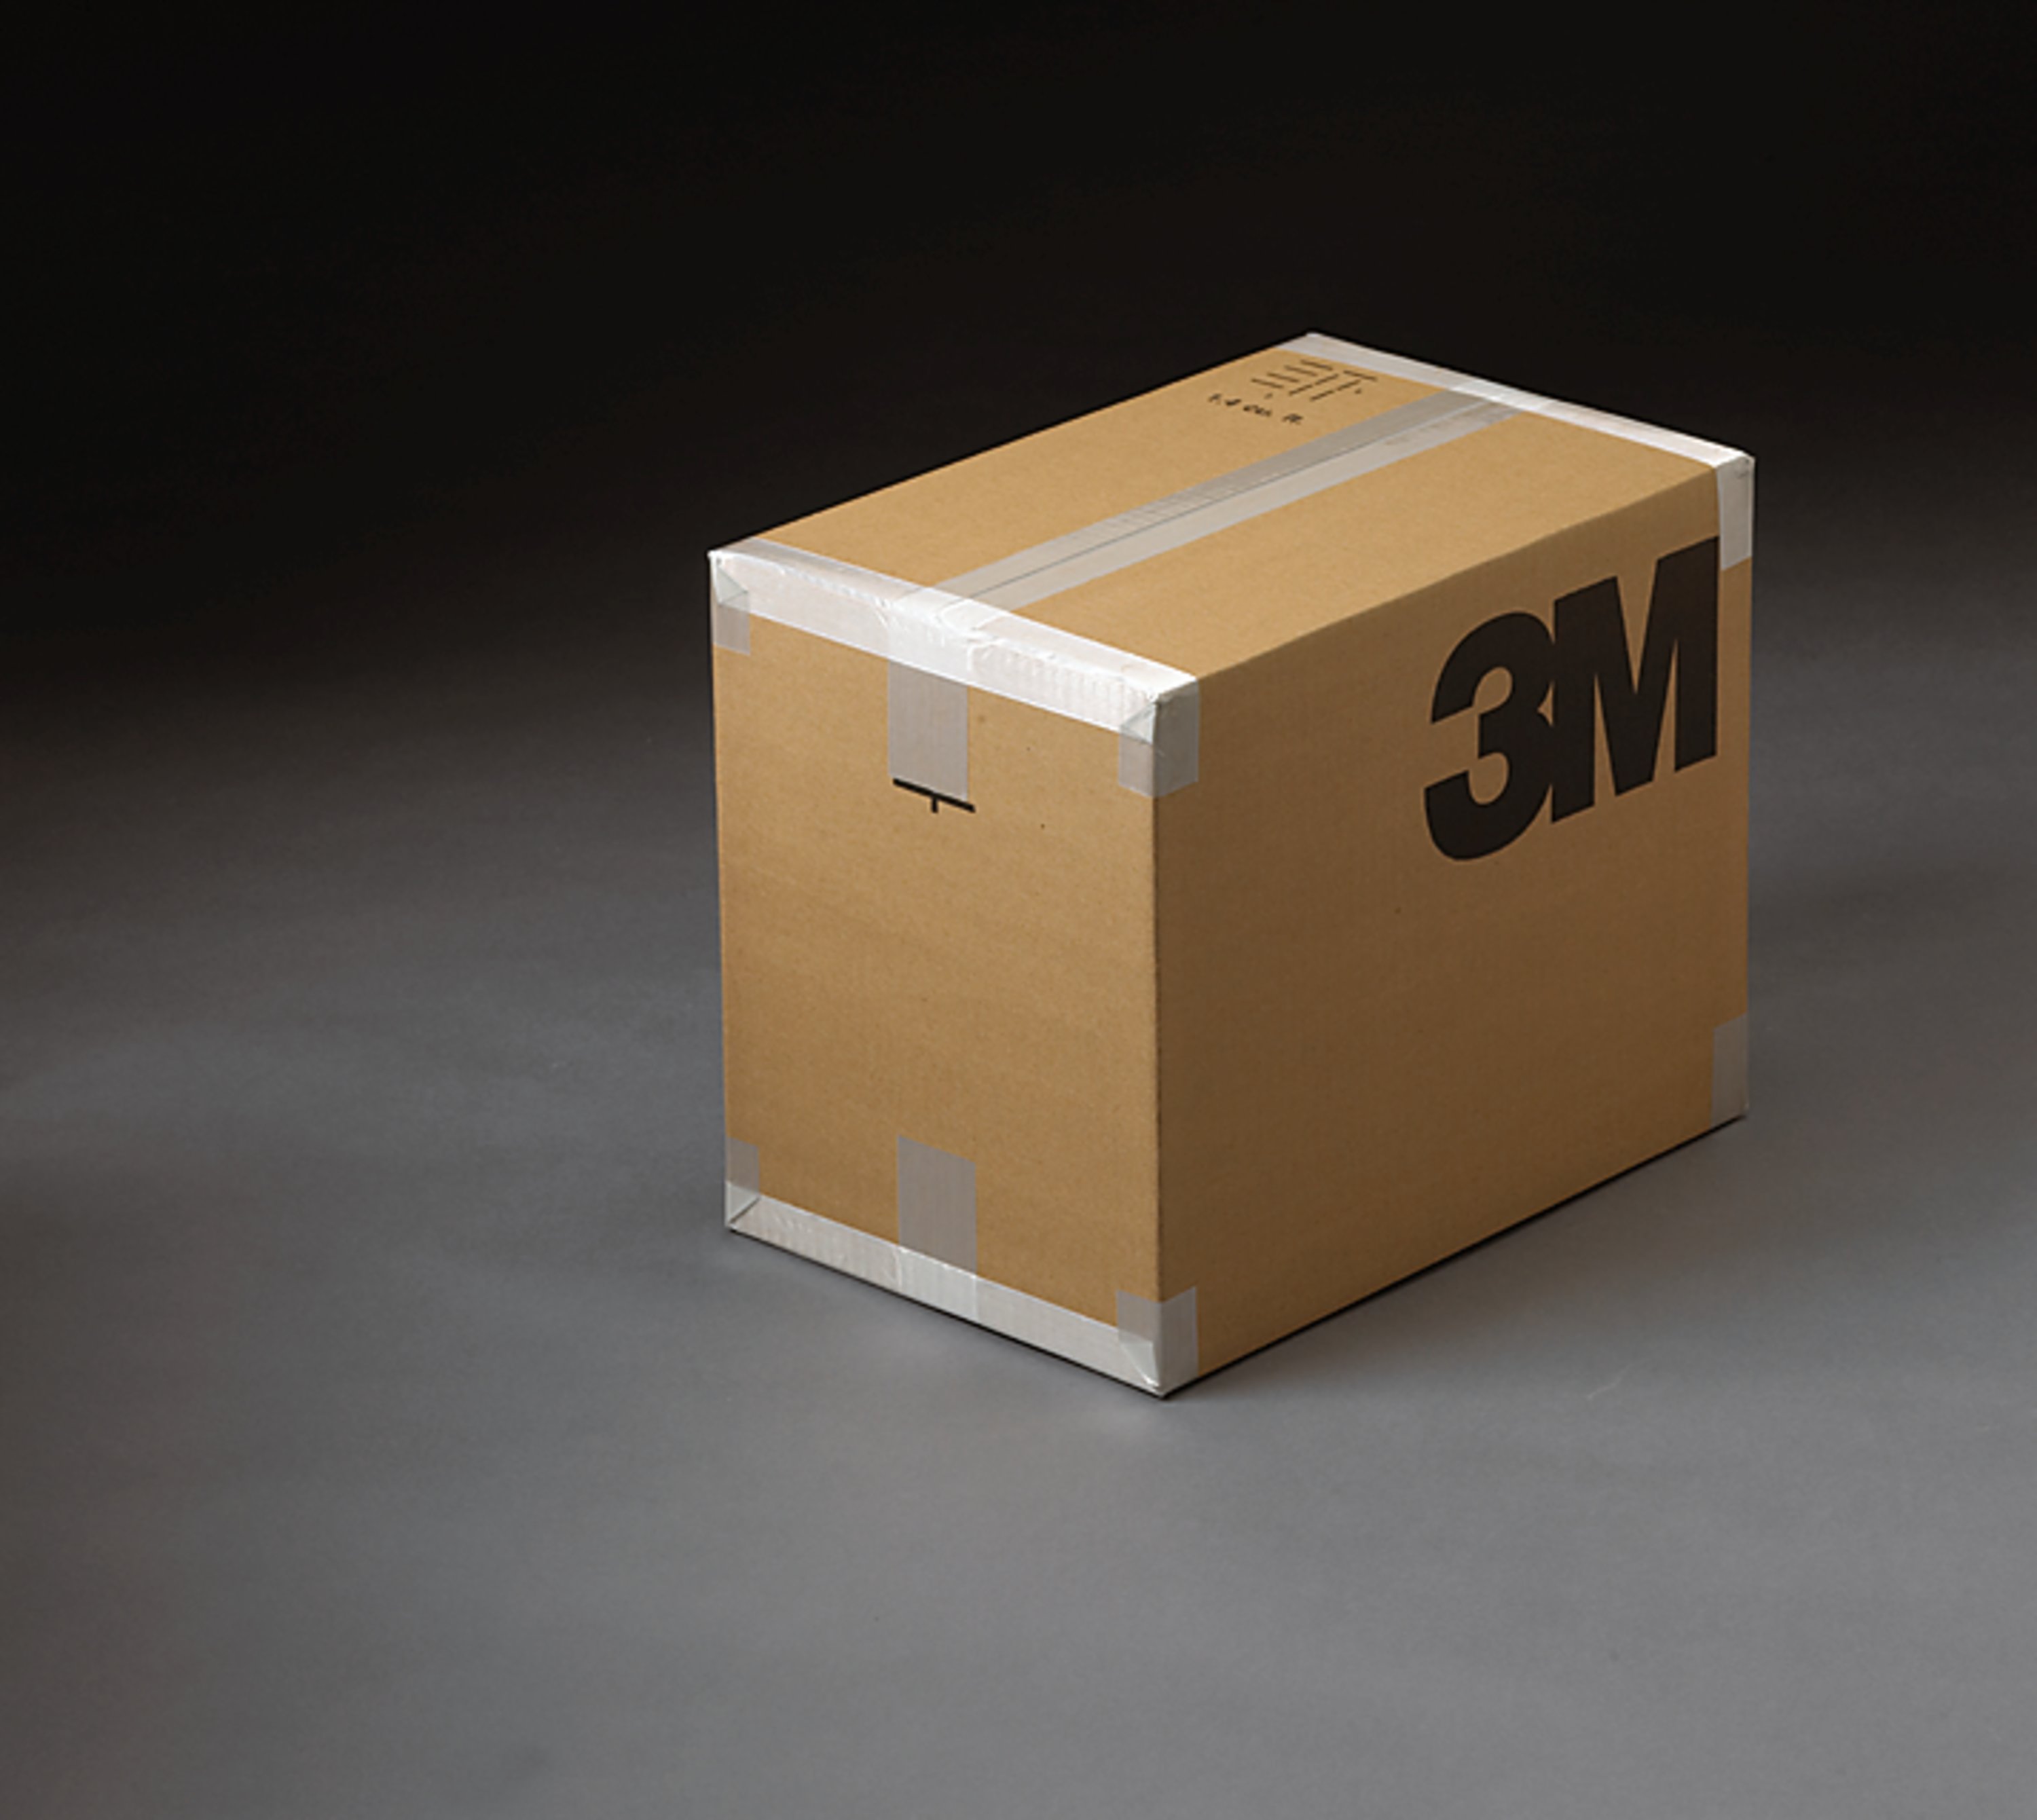 3M's line of filament-reinforced tapes and strapping tapes are high strength, reliable and affordable solutions that give you product and package integrity